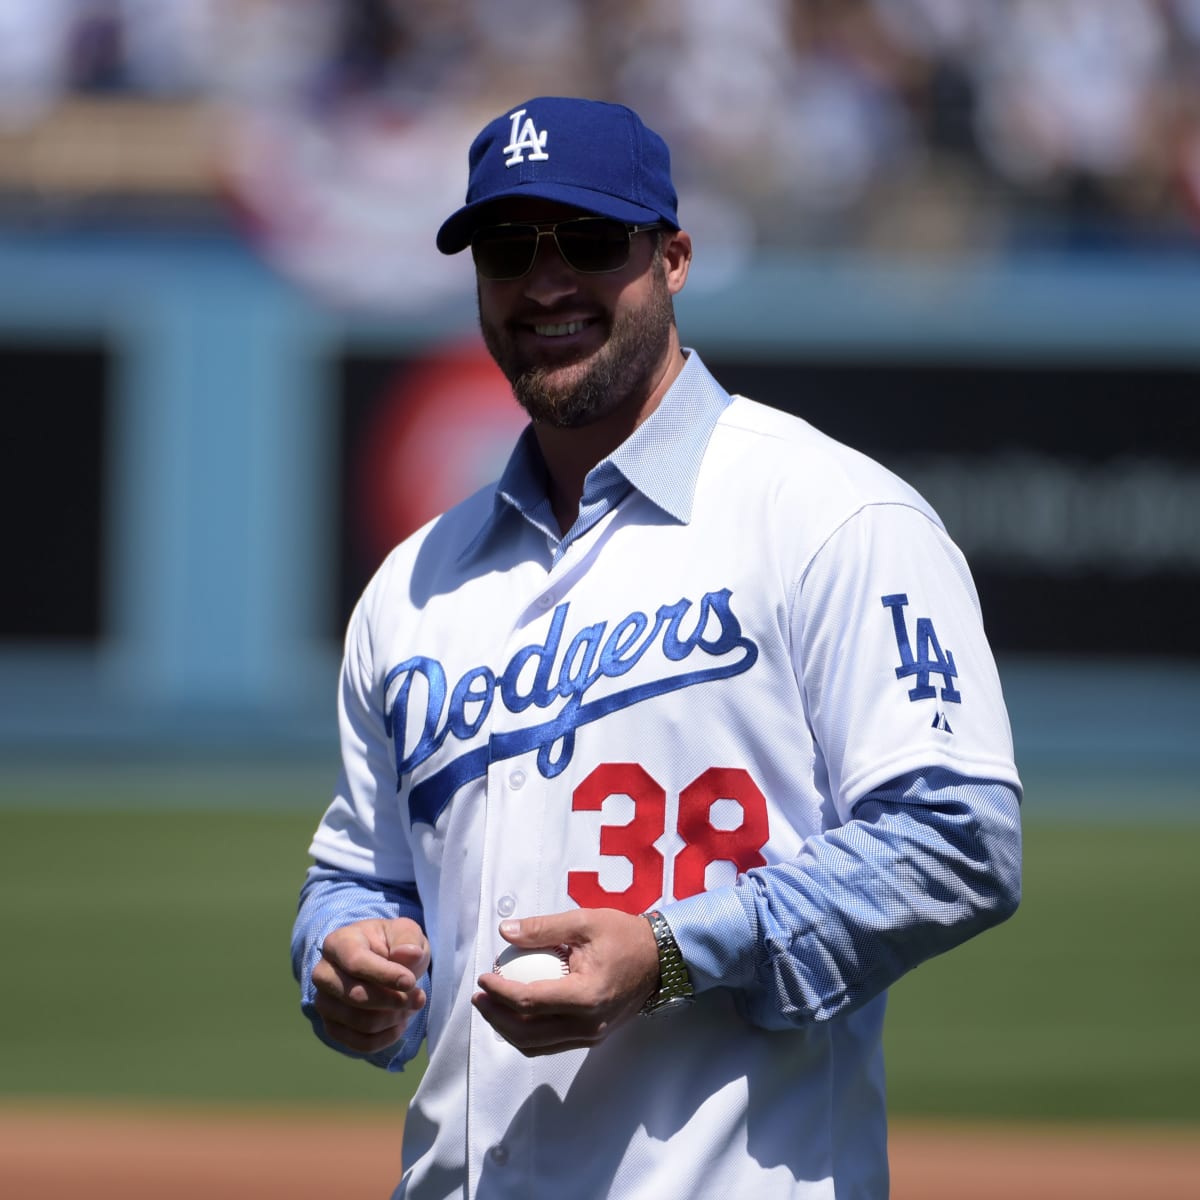 Dodgers: Eric Gagne Dials Up the Velocity in Recent Video - Inside